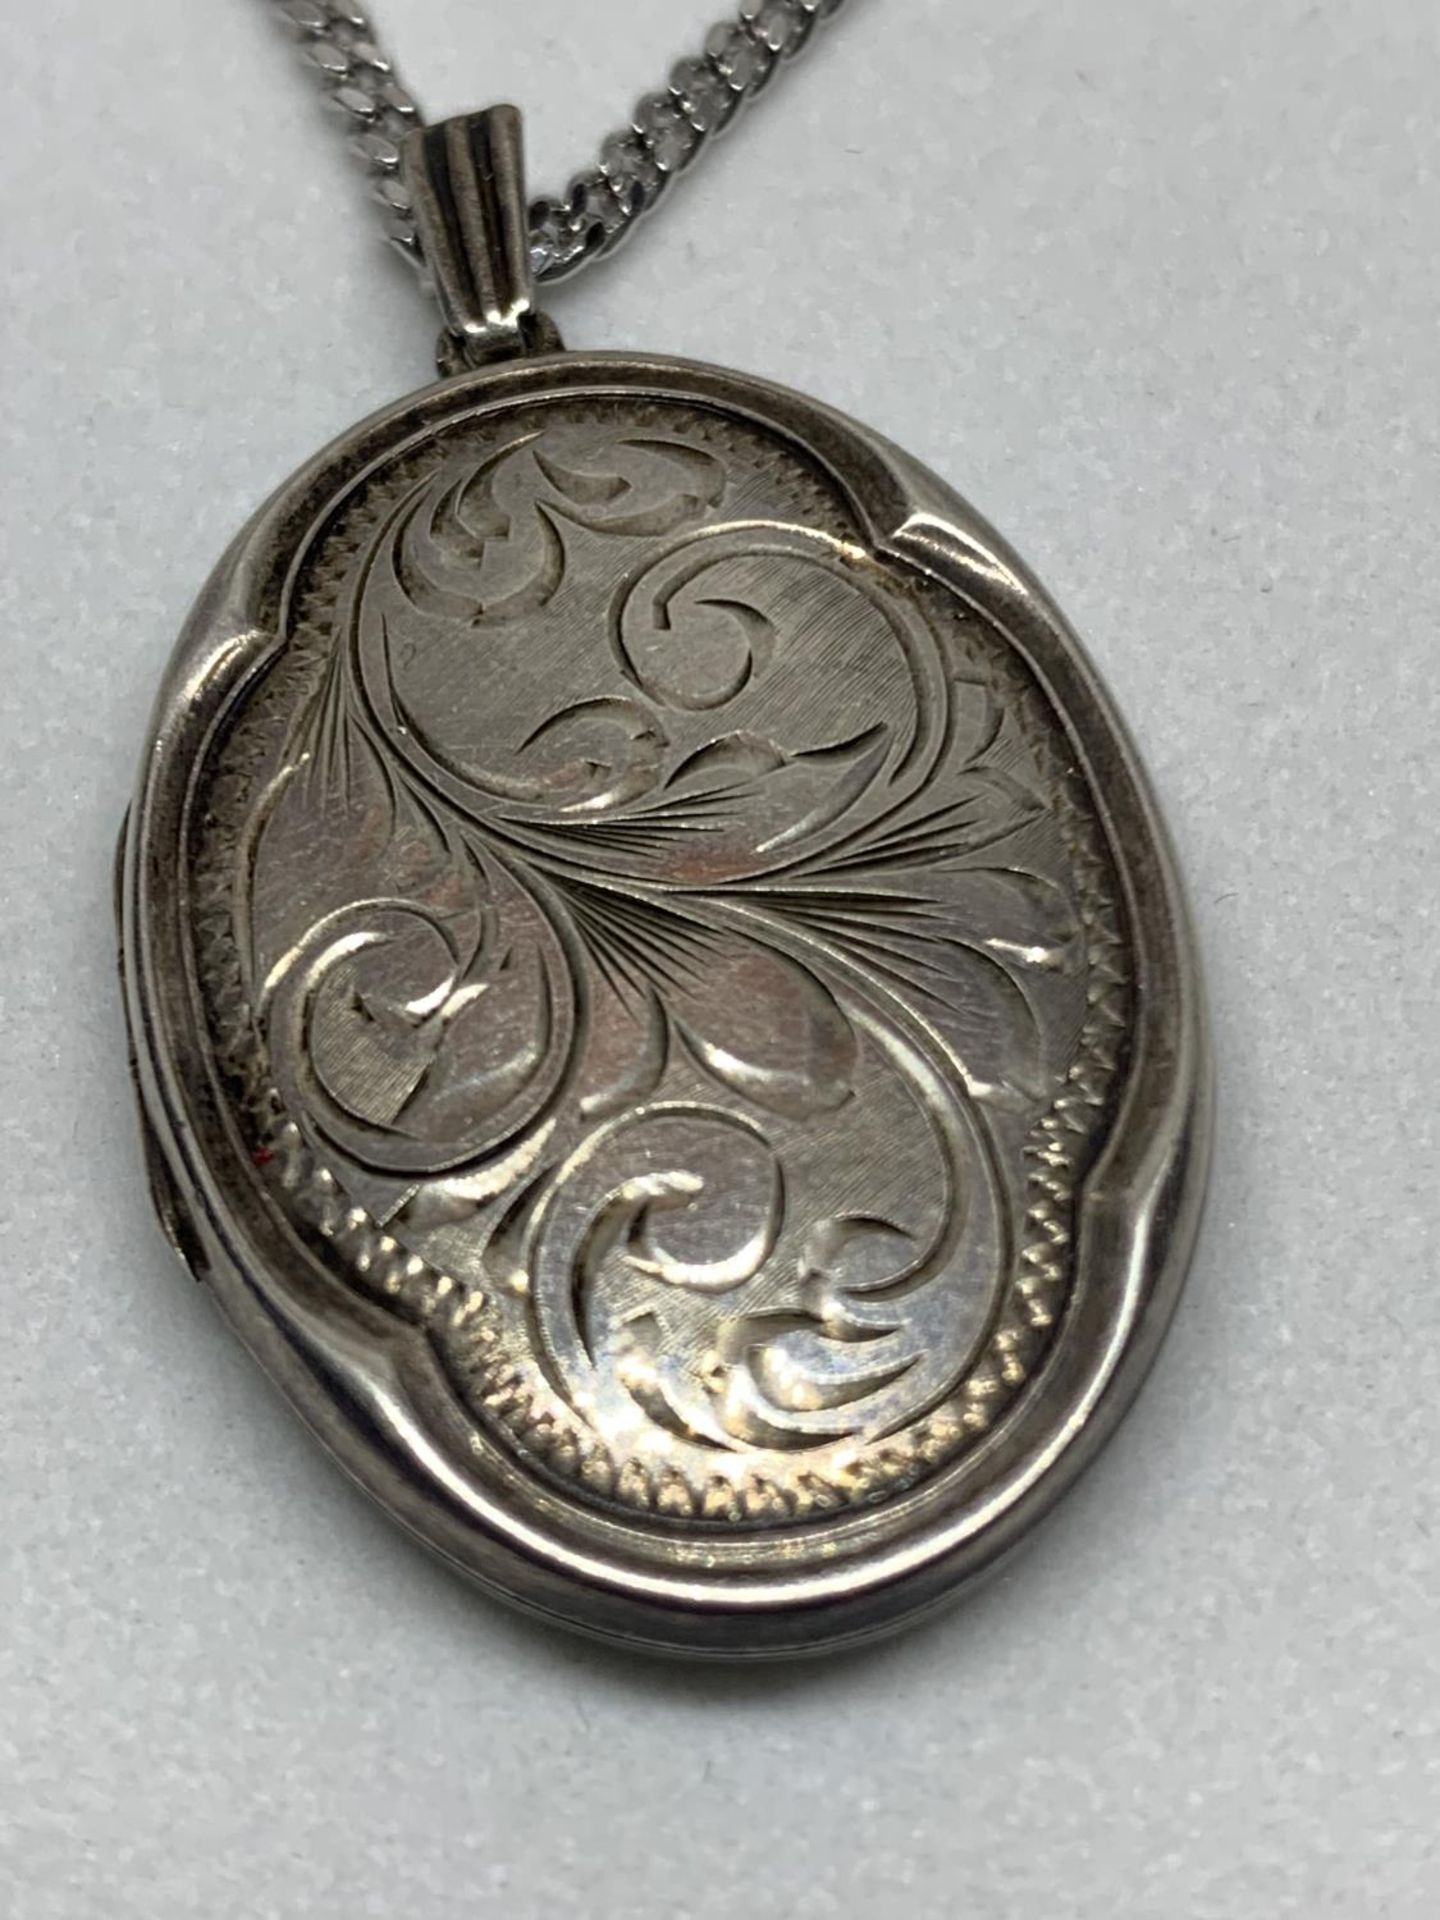 A SILVER NECKLACE WITH A SILVER LOCKET IN A PRESENTATION BOX - Image 2 of 4